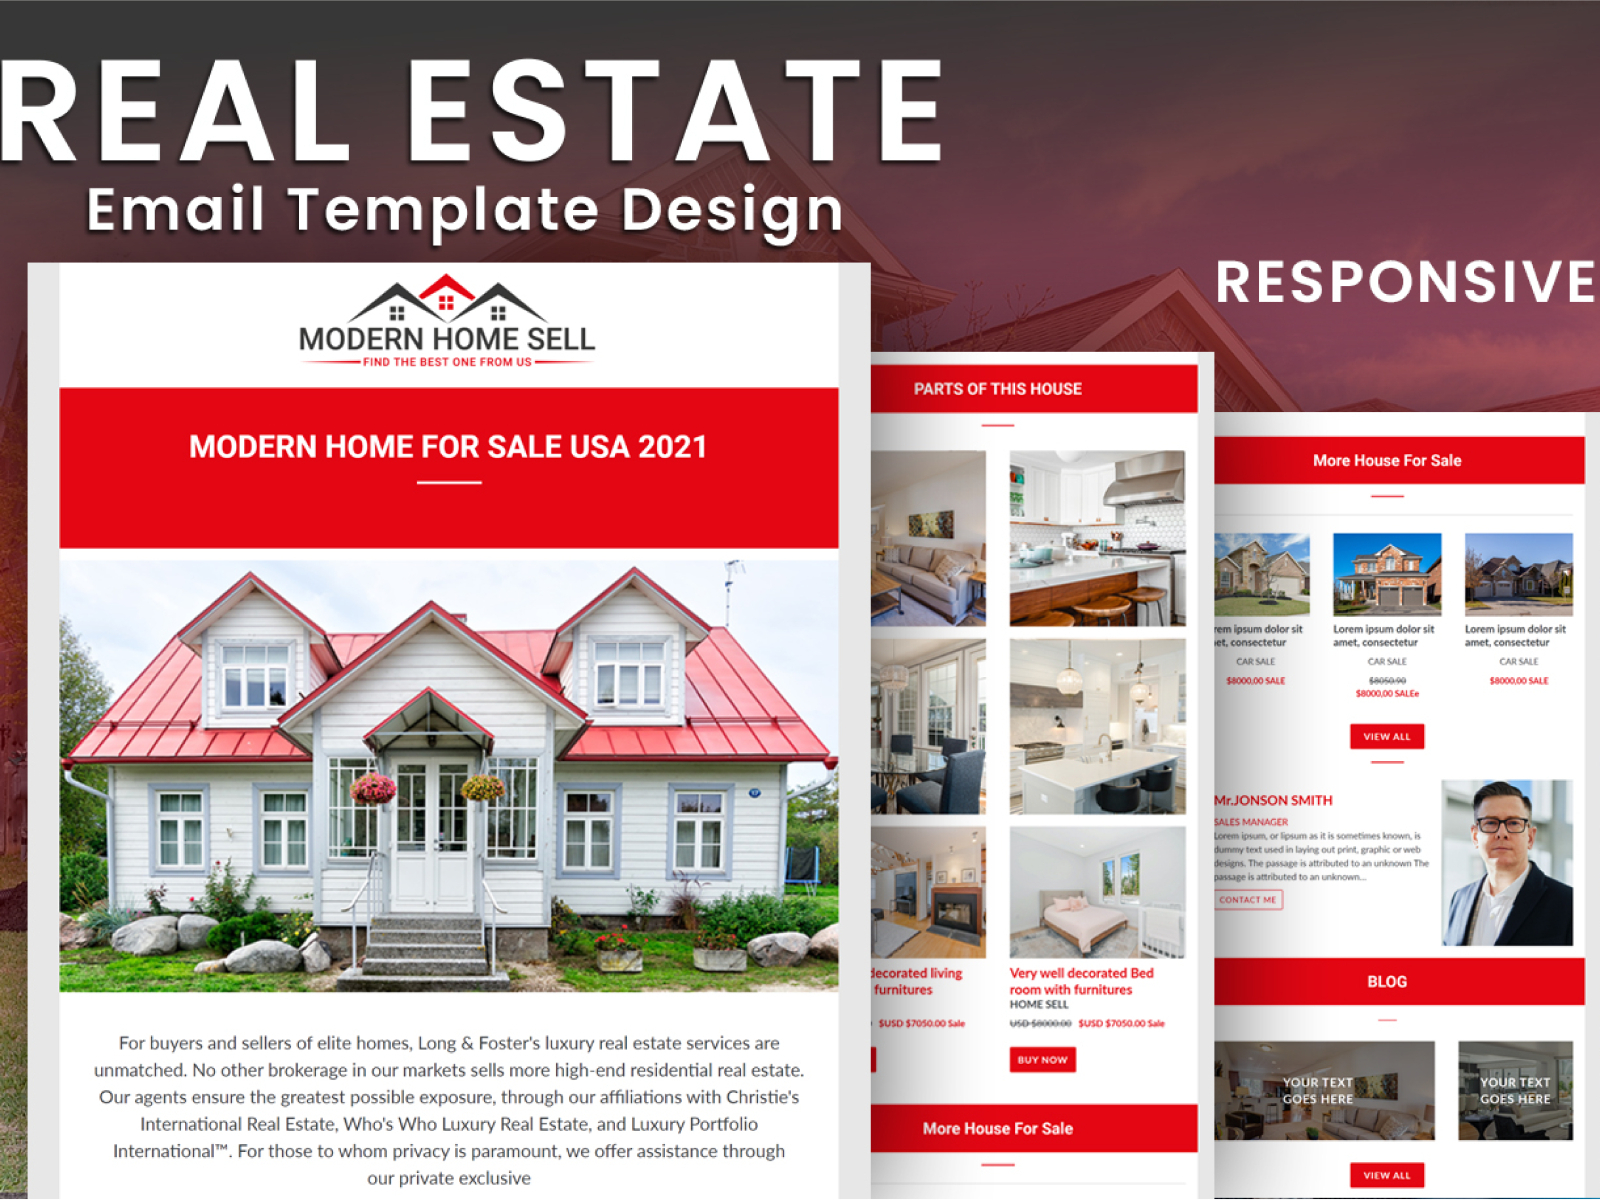 Real Estate MailChimp Email Template Design by Belal Ahmed on Dribbble